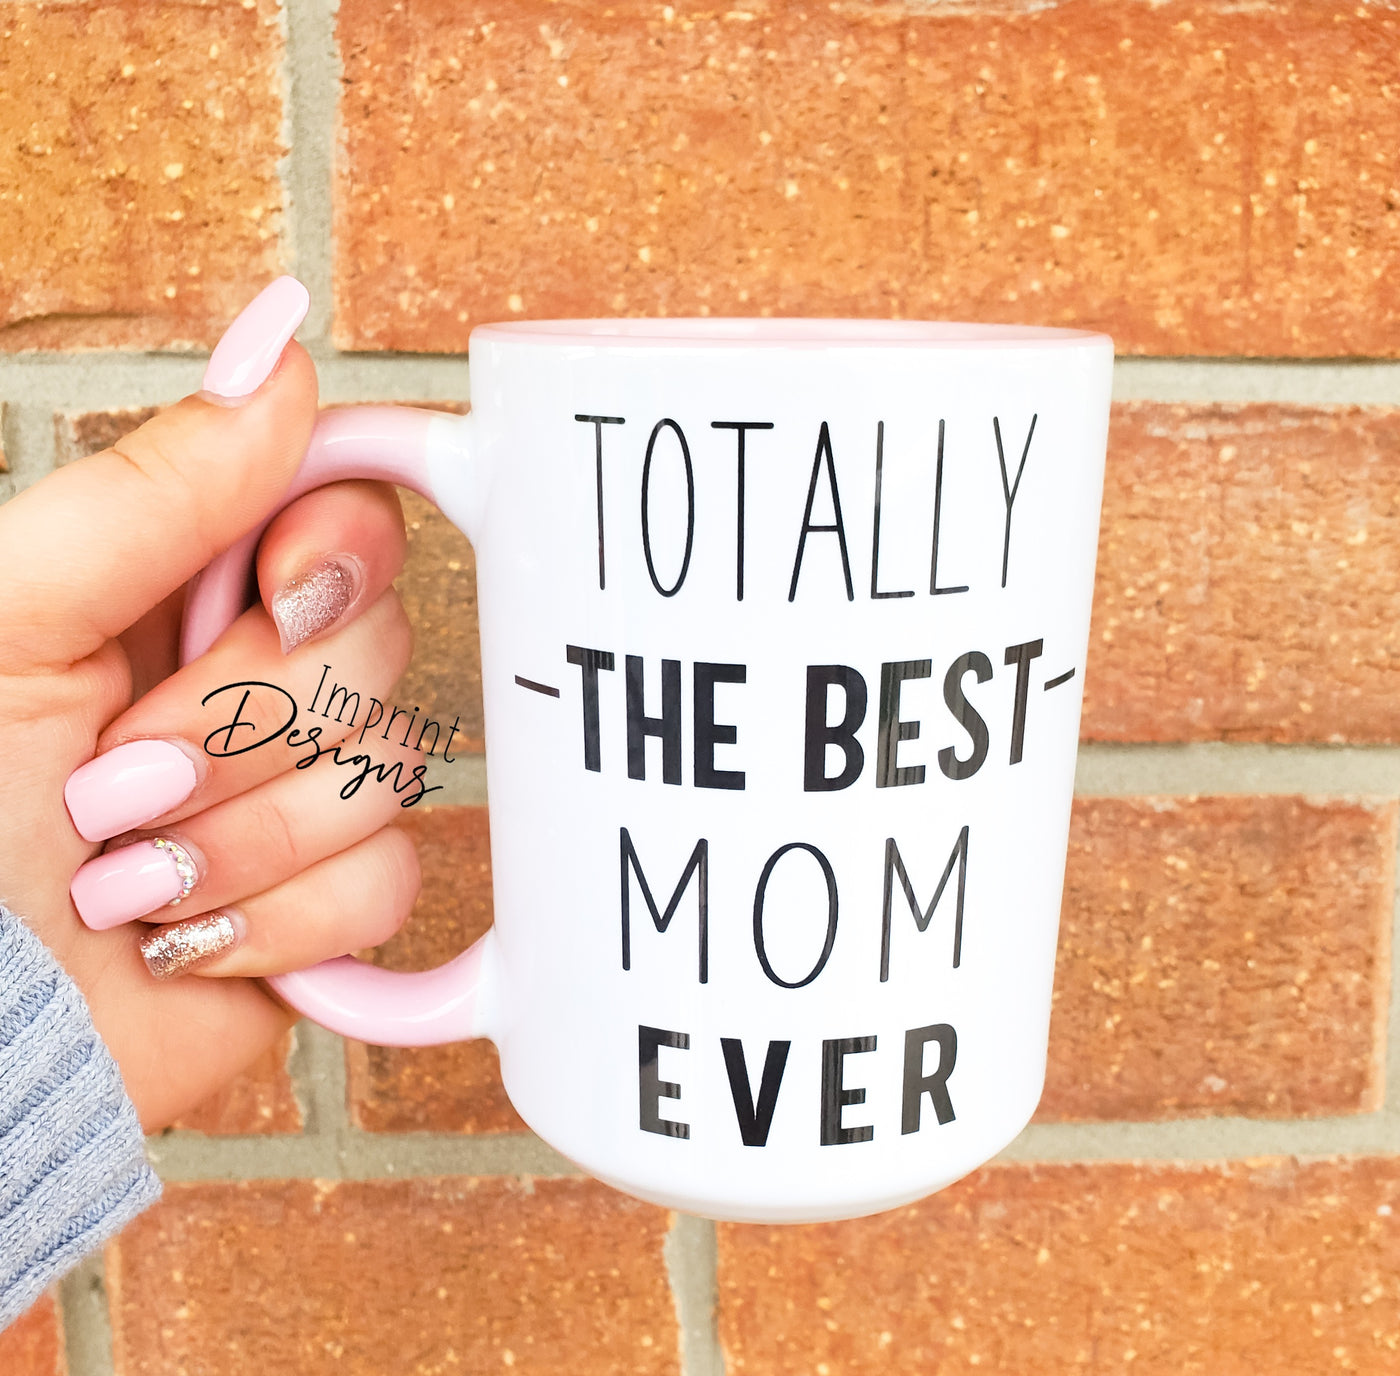 Totally the best Mom